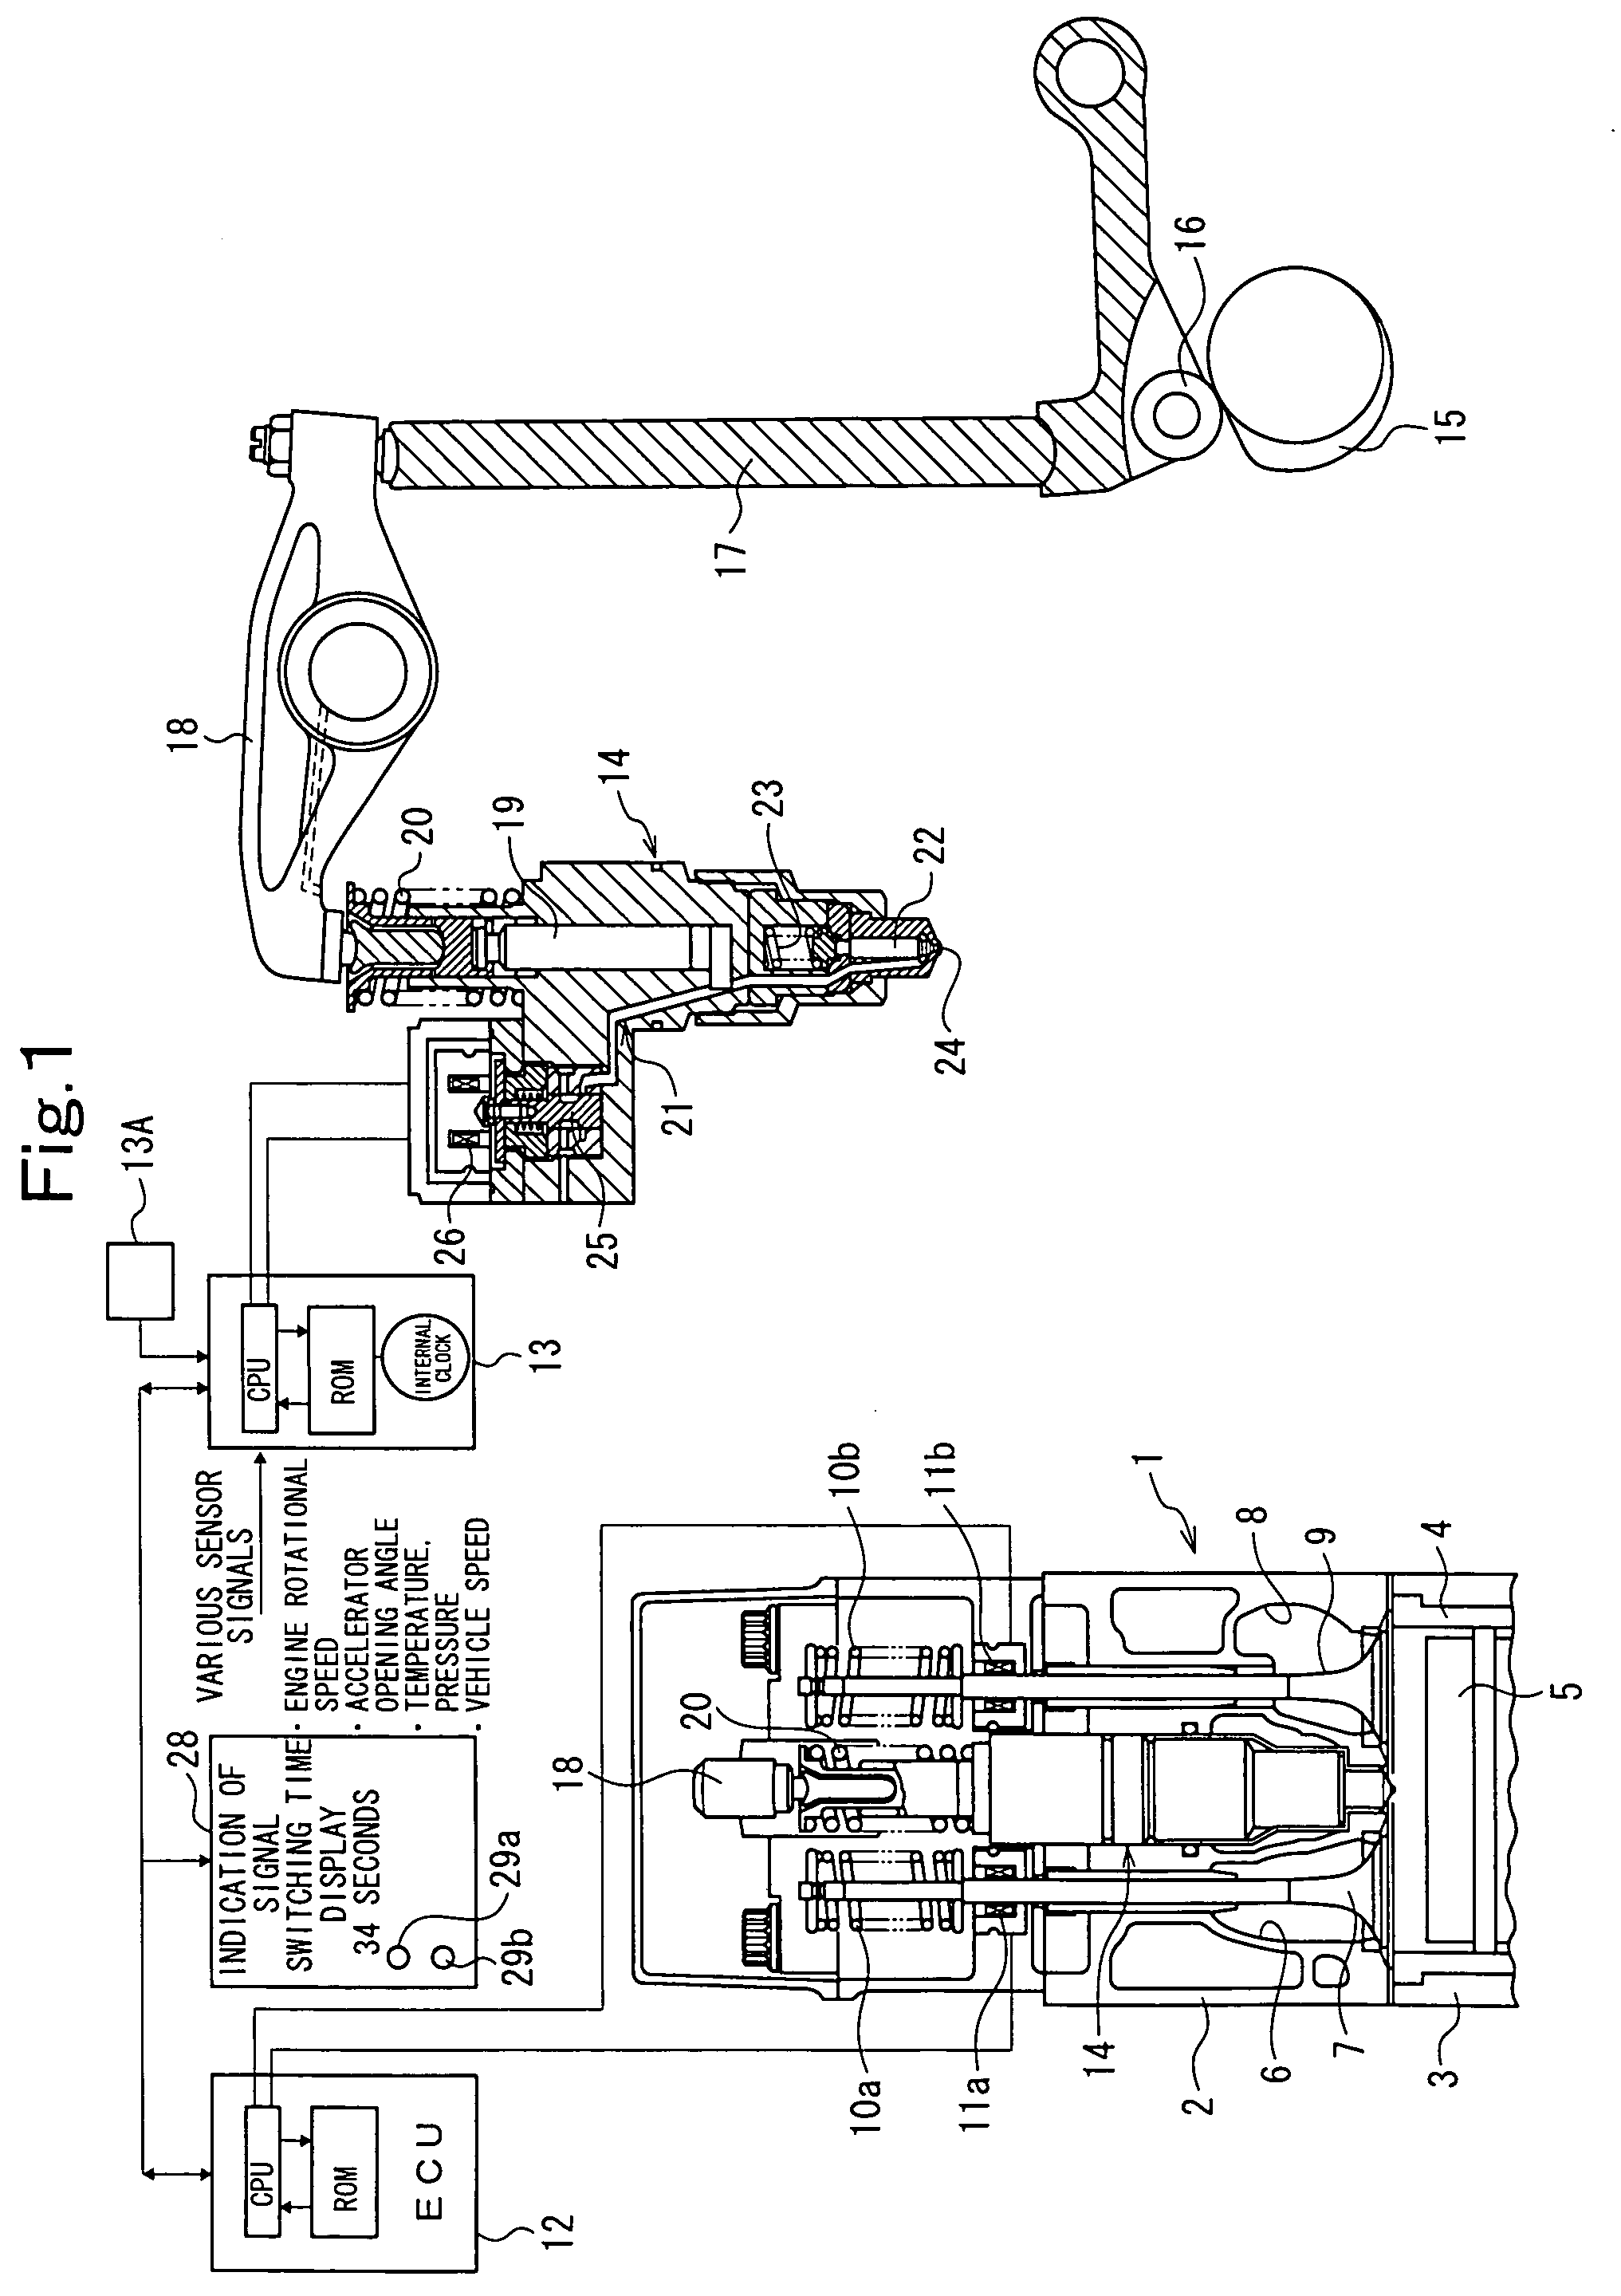 Control device for multi-cylinder internal combustion engine and signaling device capable of providing same with information